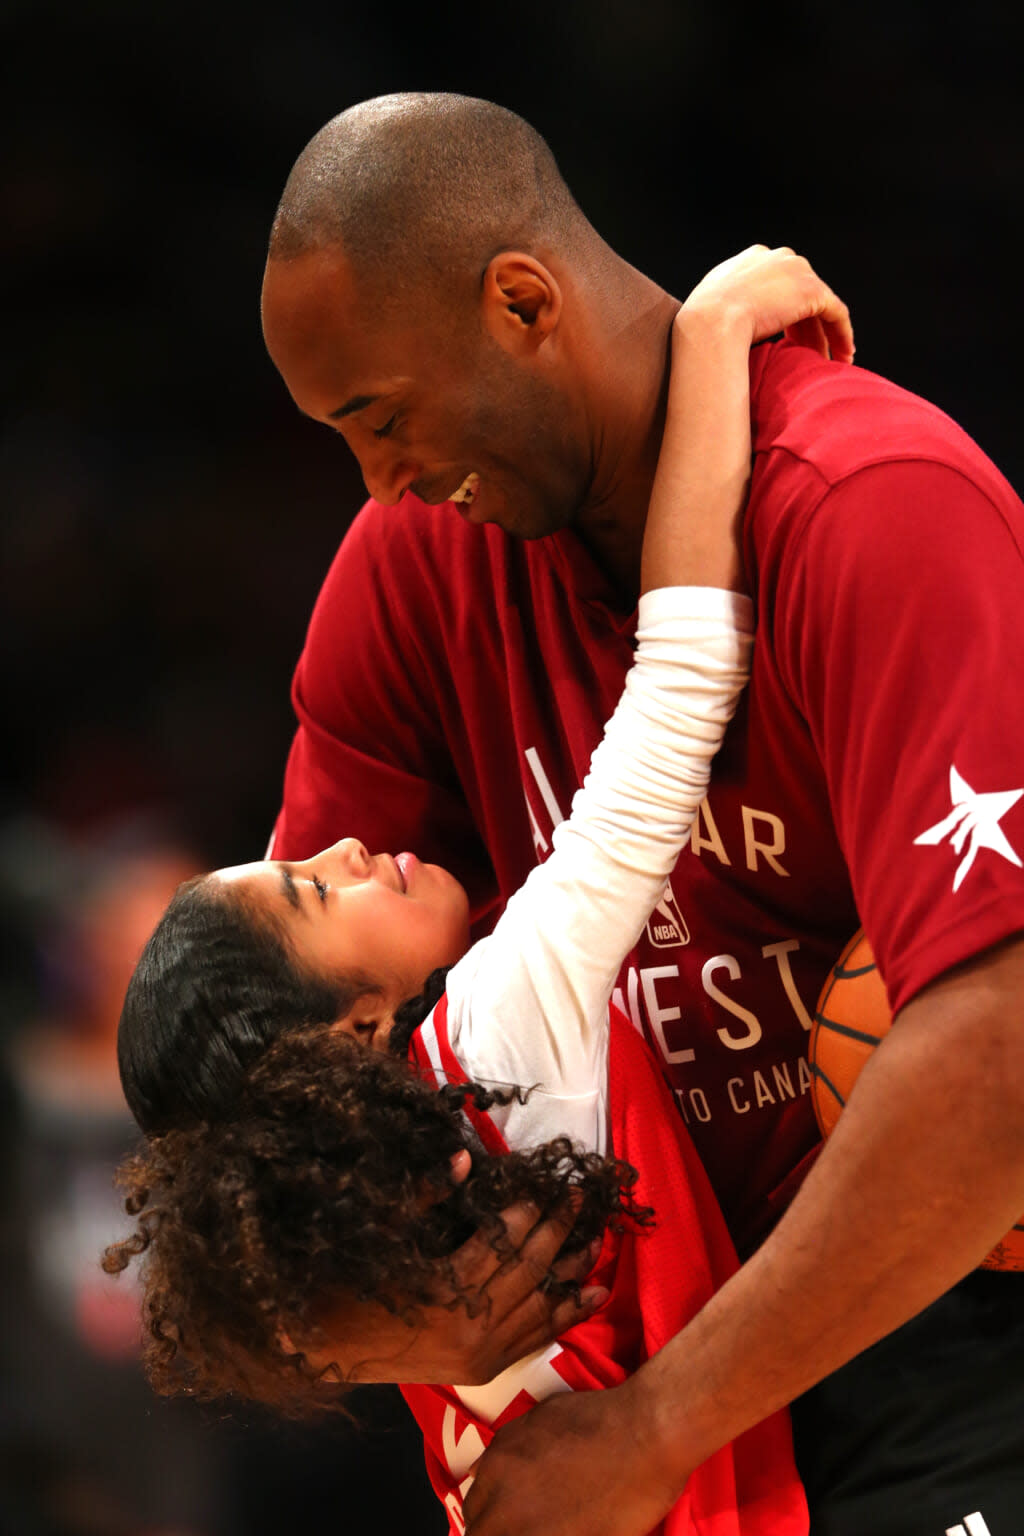 Kobe Bryant #24 of the Los Angeles Lakers and the Western Conference warms up with daughter Gianna Bryant during the NBA All-Star Game 2016 at the Air Canada Centre on February 14, 2016 in Toronto, Ontario. (Photo by Elsa/Getty Images)